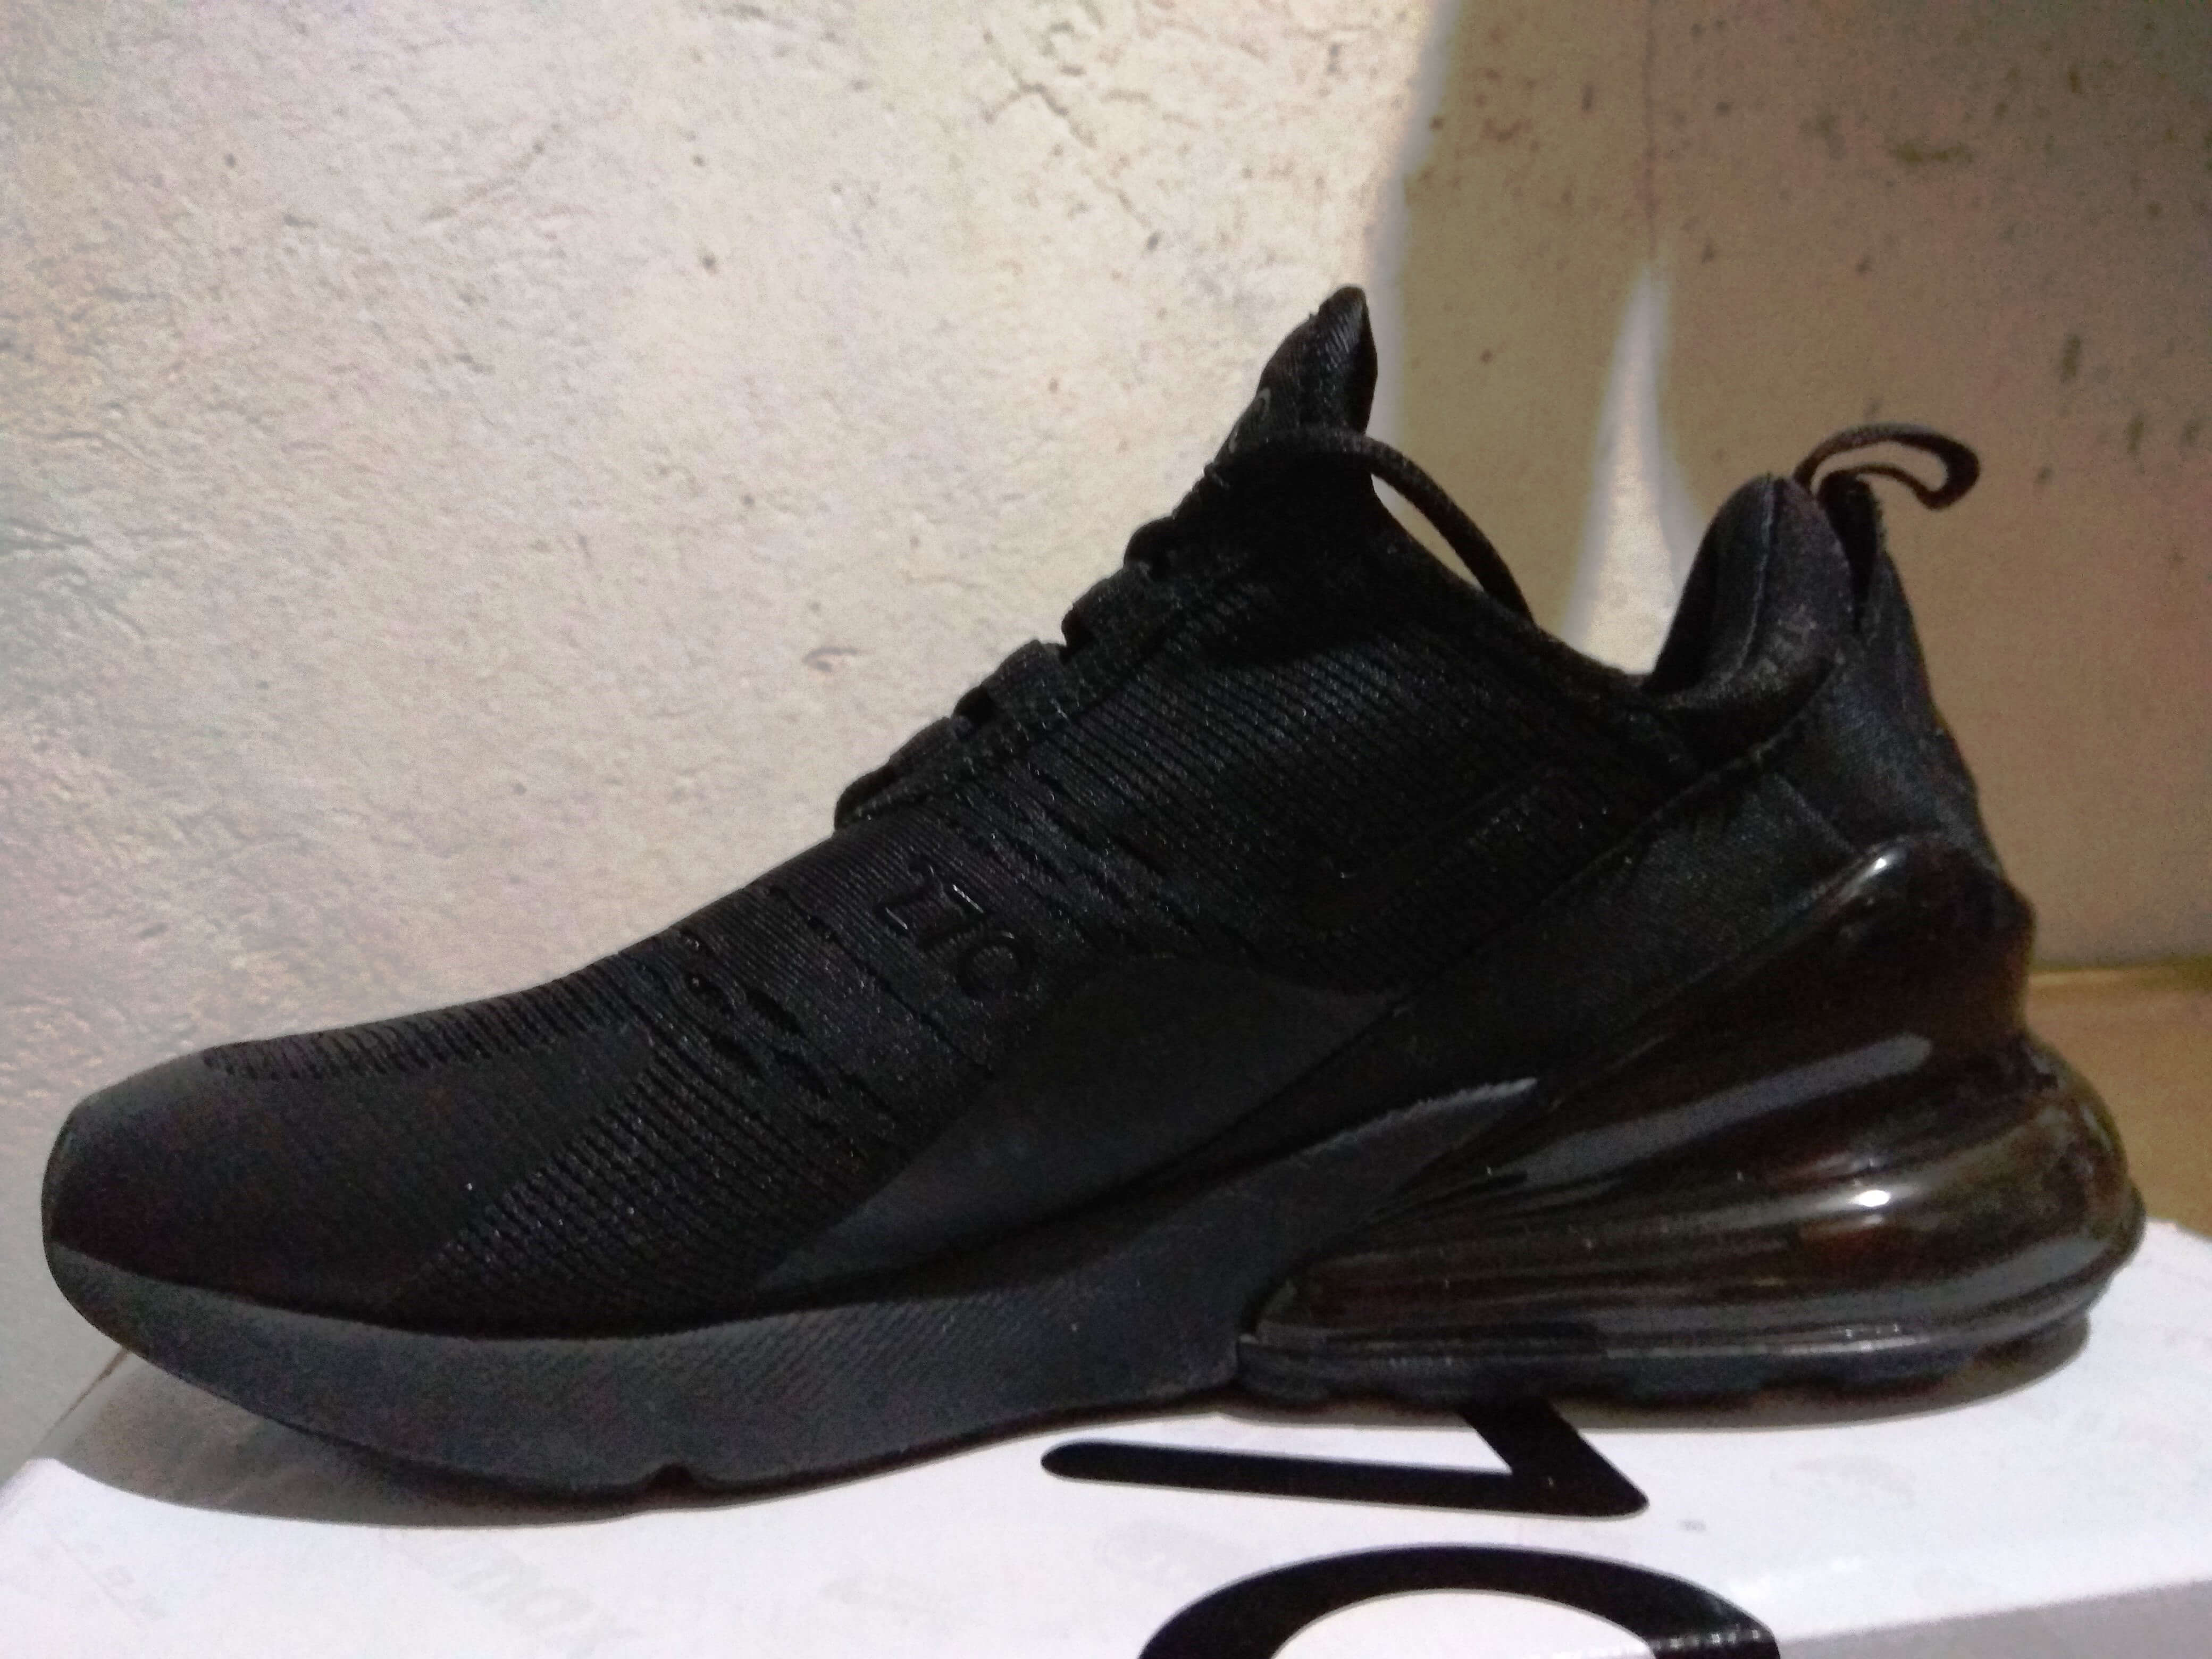 This is What a Fake Nike Air Max 270 